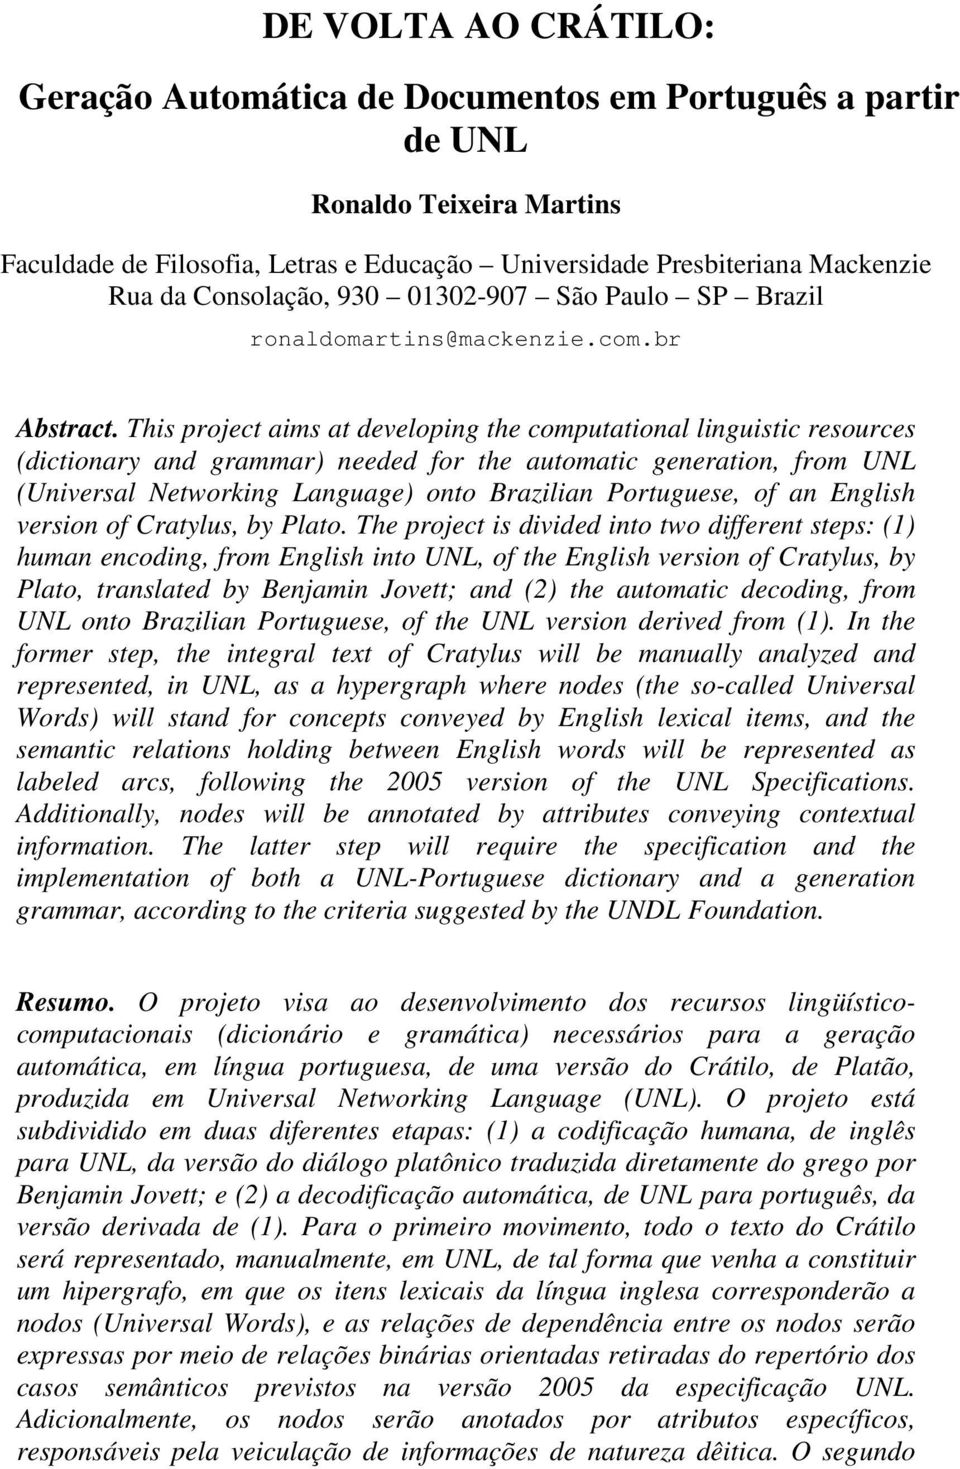 This project aims at developing the computational linguistic resources (dictionary and grammar) needed for the automatic generation, from UNL (Universal Networking Language) onto Brazilian